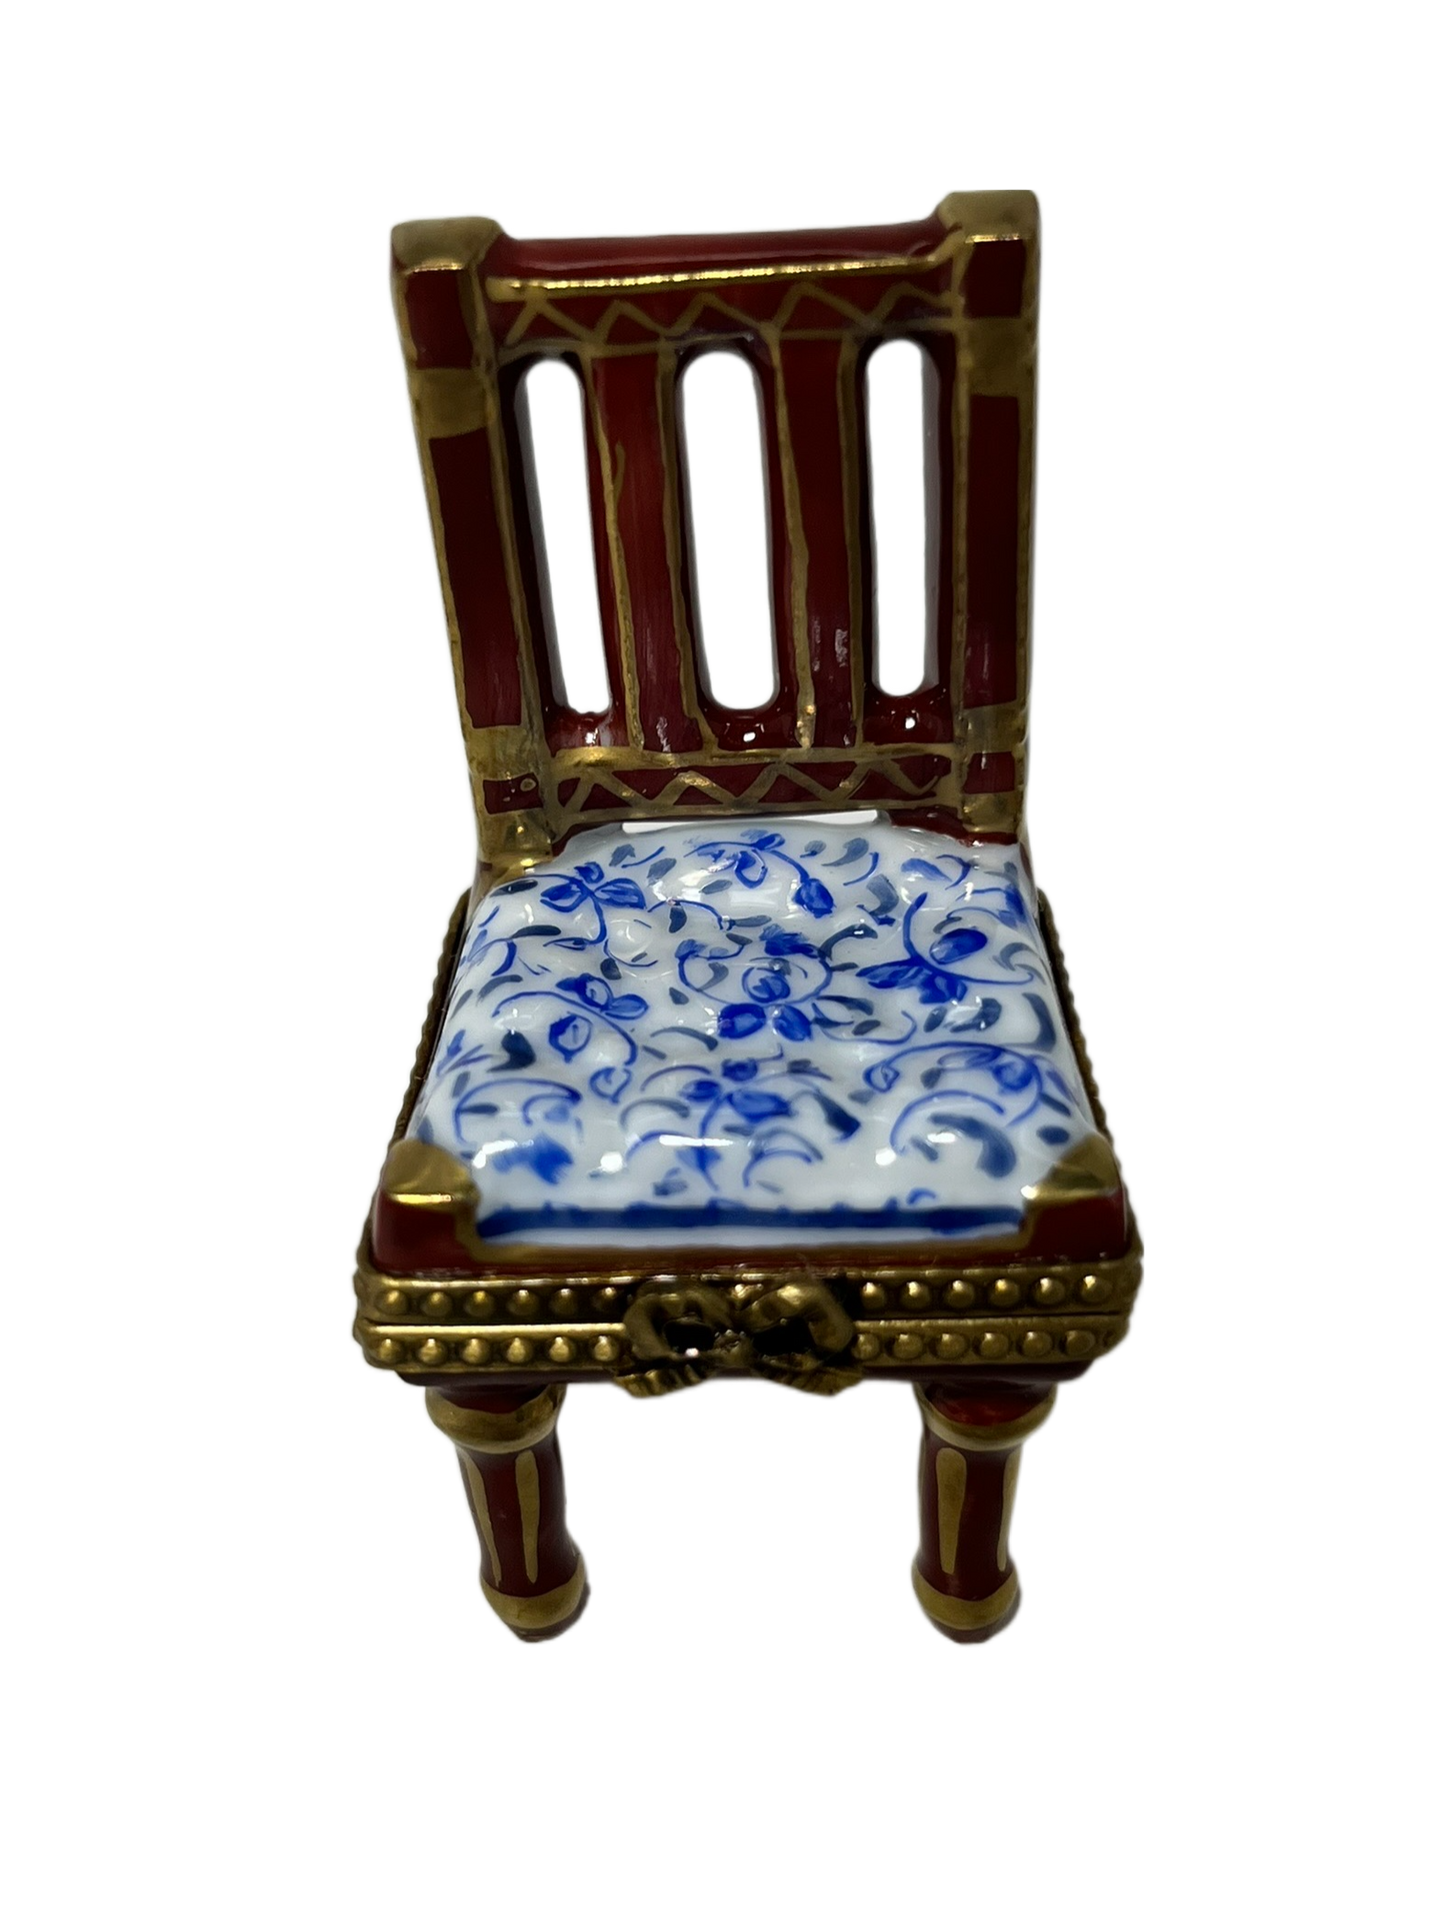 Regal Retreat: Wooden and Gold Chair Limoges Box